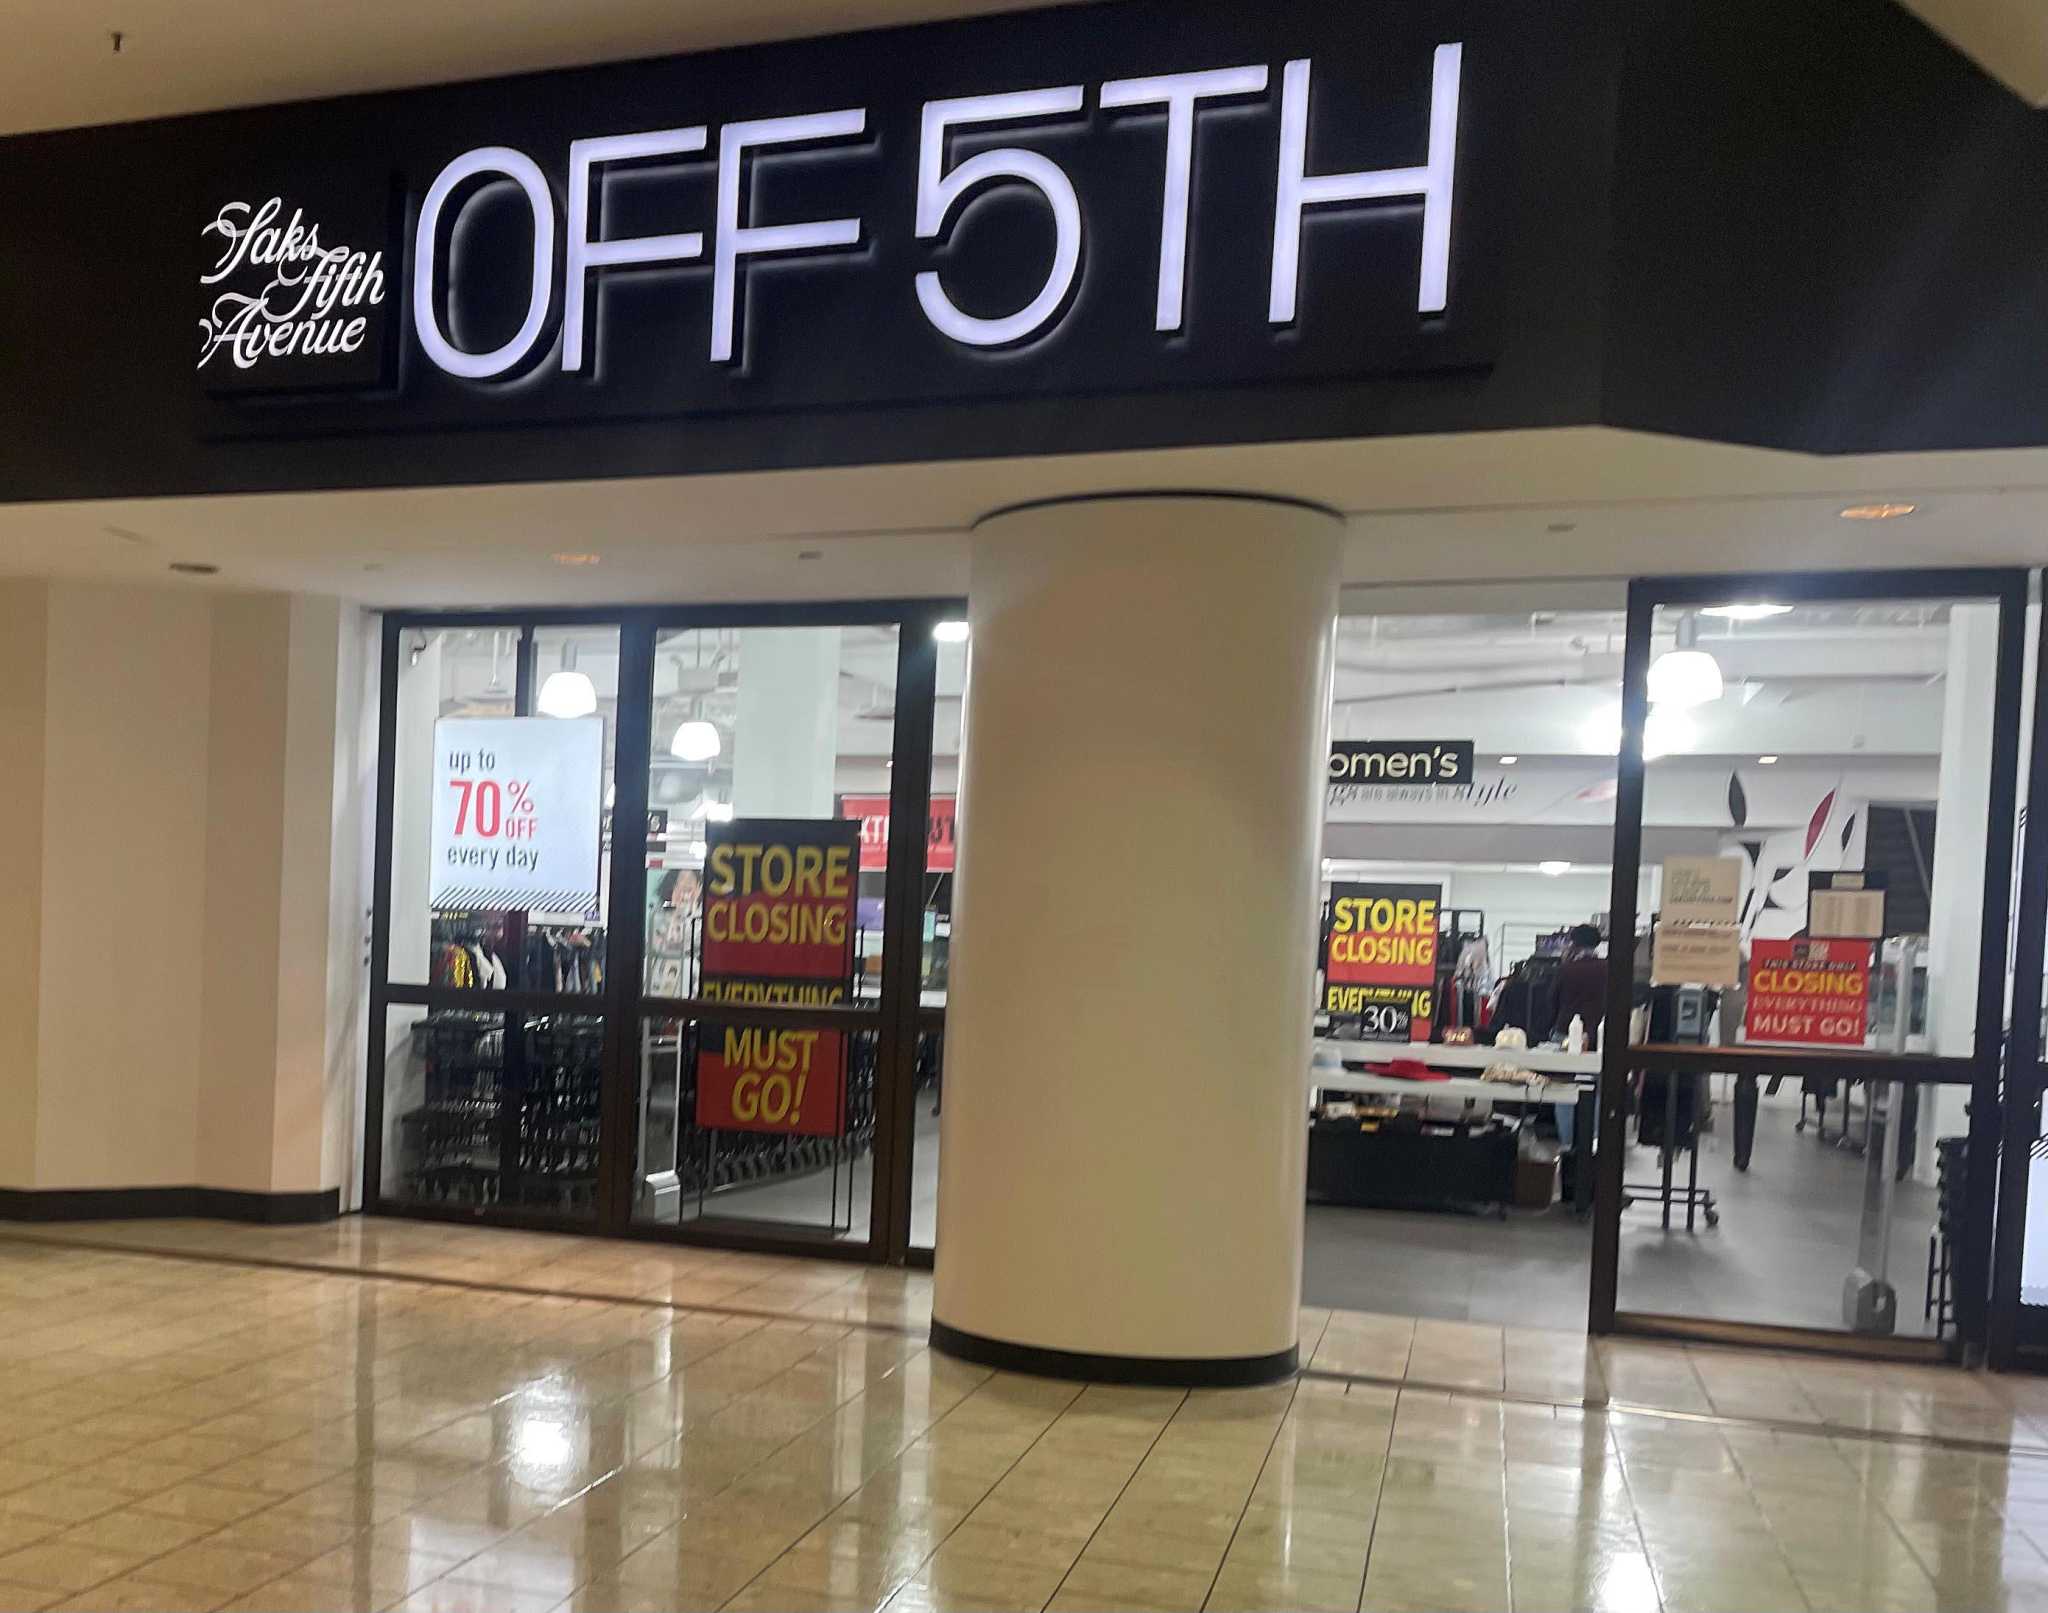 Saks Off 5th to close at Stamford Town Center, Michael Kors confirms exit